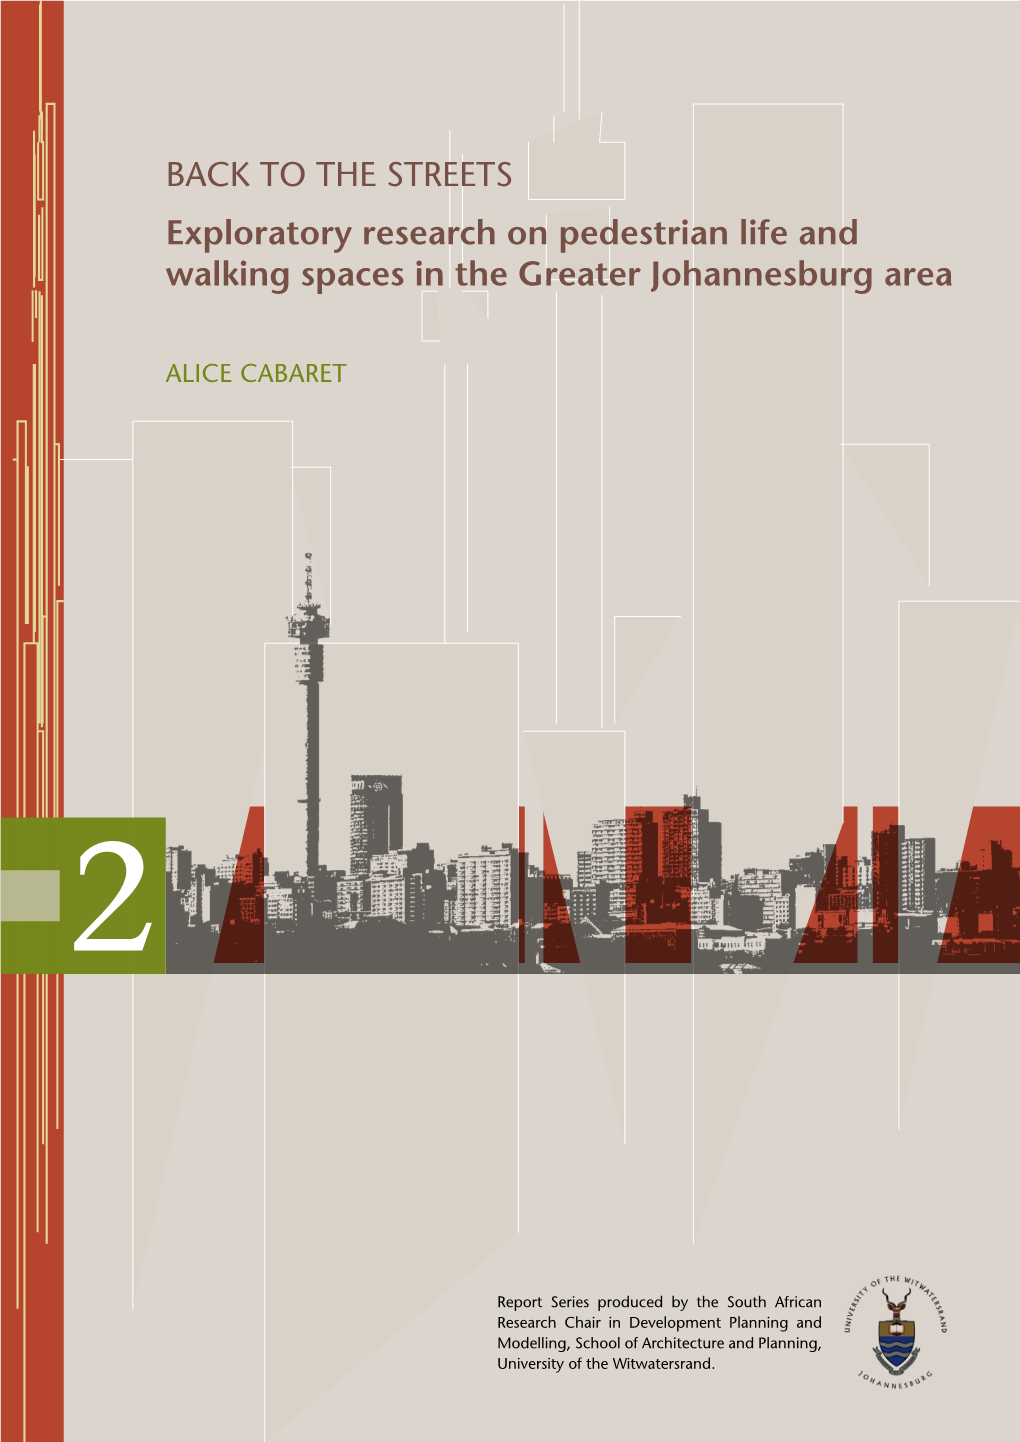 The Streets Exploratory Research on Pedestrian Life and Walking Spaces in the Greater Johannesburg Area